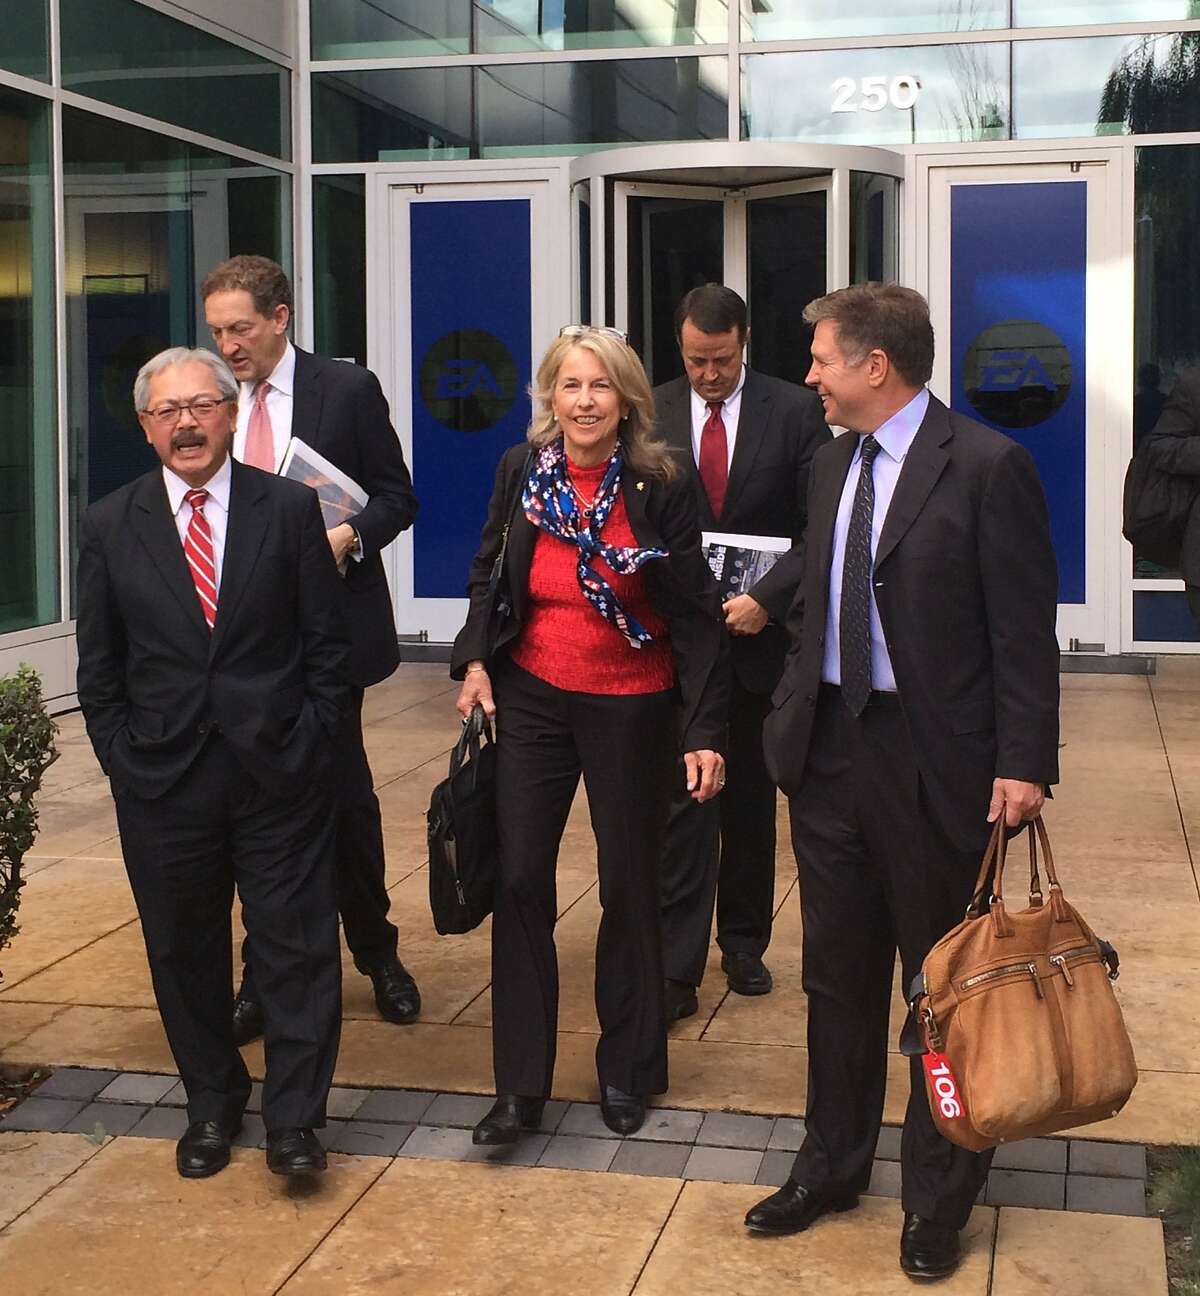 San Francisco's delegation leaves the Electronic Arts office in Redwood City, Calif., on Tuesday, Dec. 16, 2014, after making a presentation to the U.S. Olympic Committee about hosting the 2024 Summer Olympic Games. From left to right, San Francisco Mayor Ed Lee, Giants President and CEO Larry Baer, Olympic gold medal swimmer Anne Warner Cribbs, Populous senior principal Jerry Anderson, and venture capitalist Steve Strandberg. San Francisco is competing against Los Angeles, Boston and Washington D.C. to be the U.S. contender against an international field.